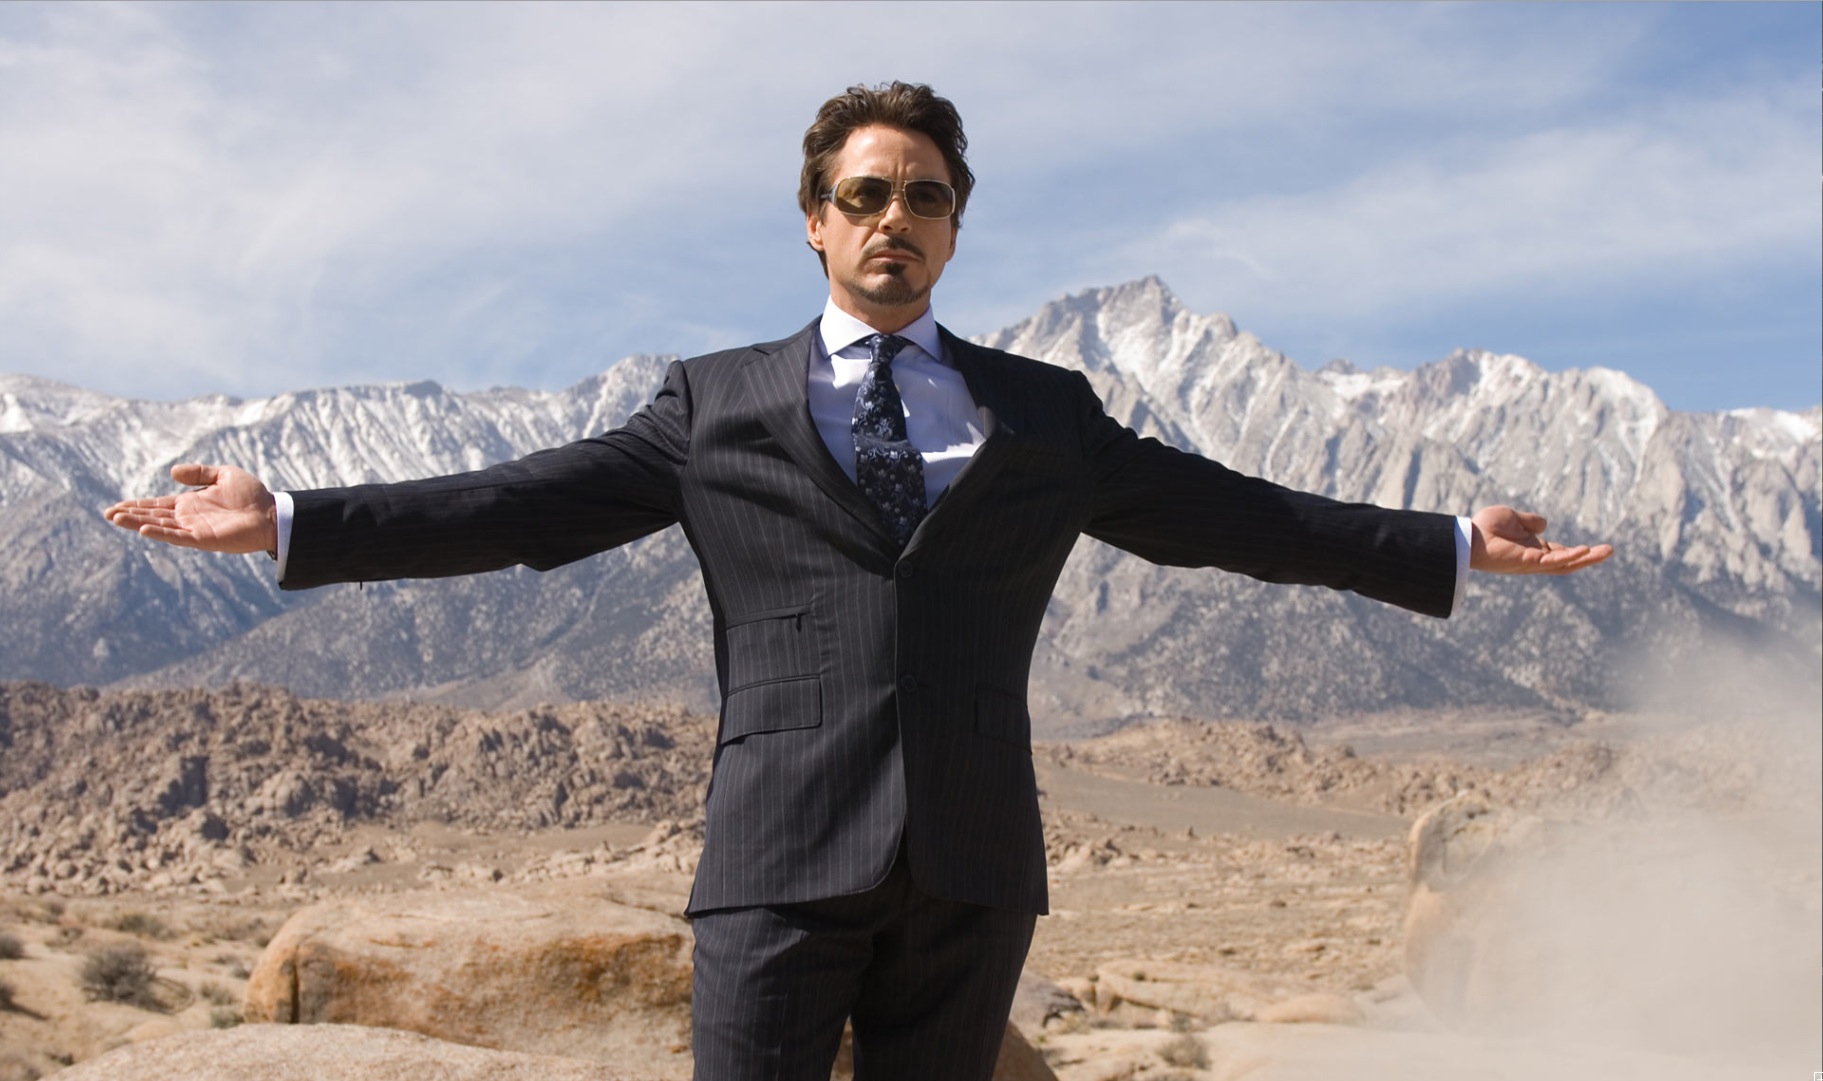 180+ Robert Downey Jr. HD Wallpapers and Backgrounds